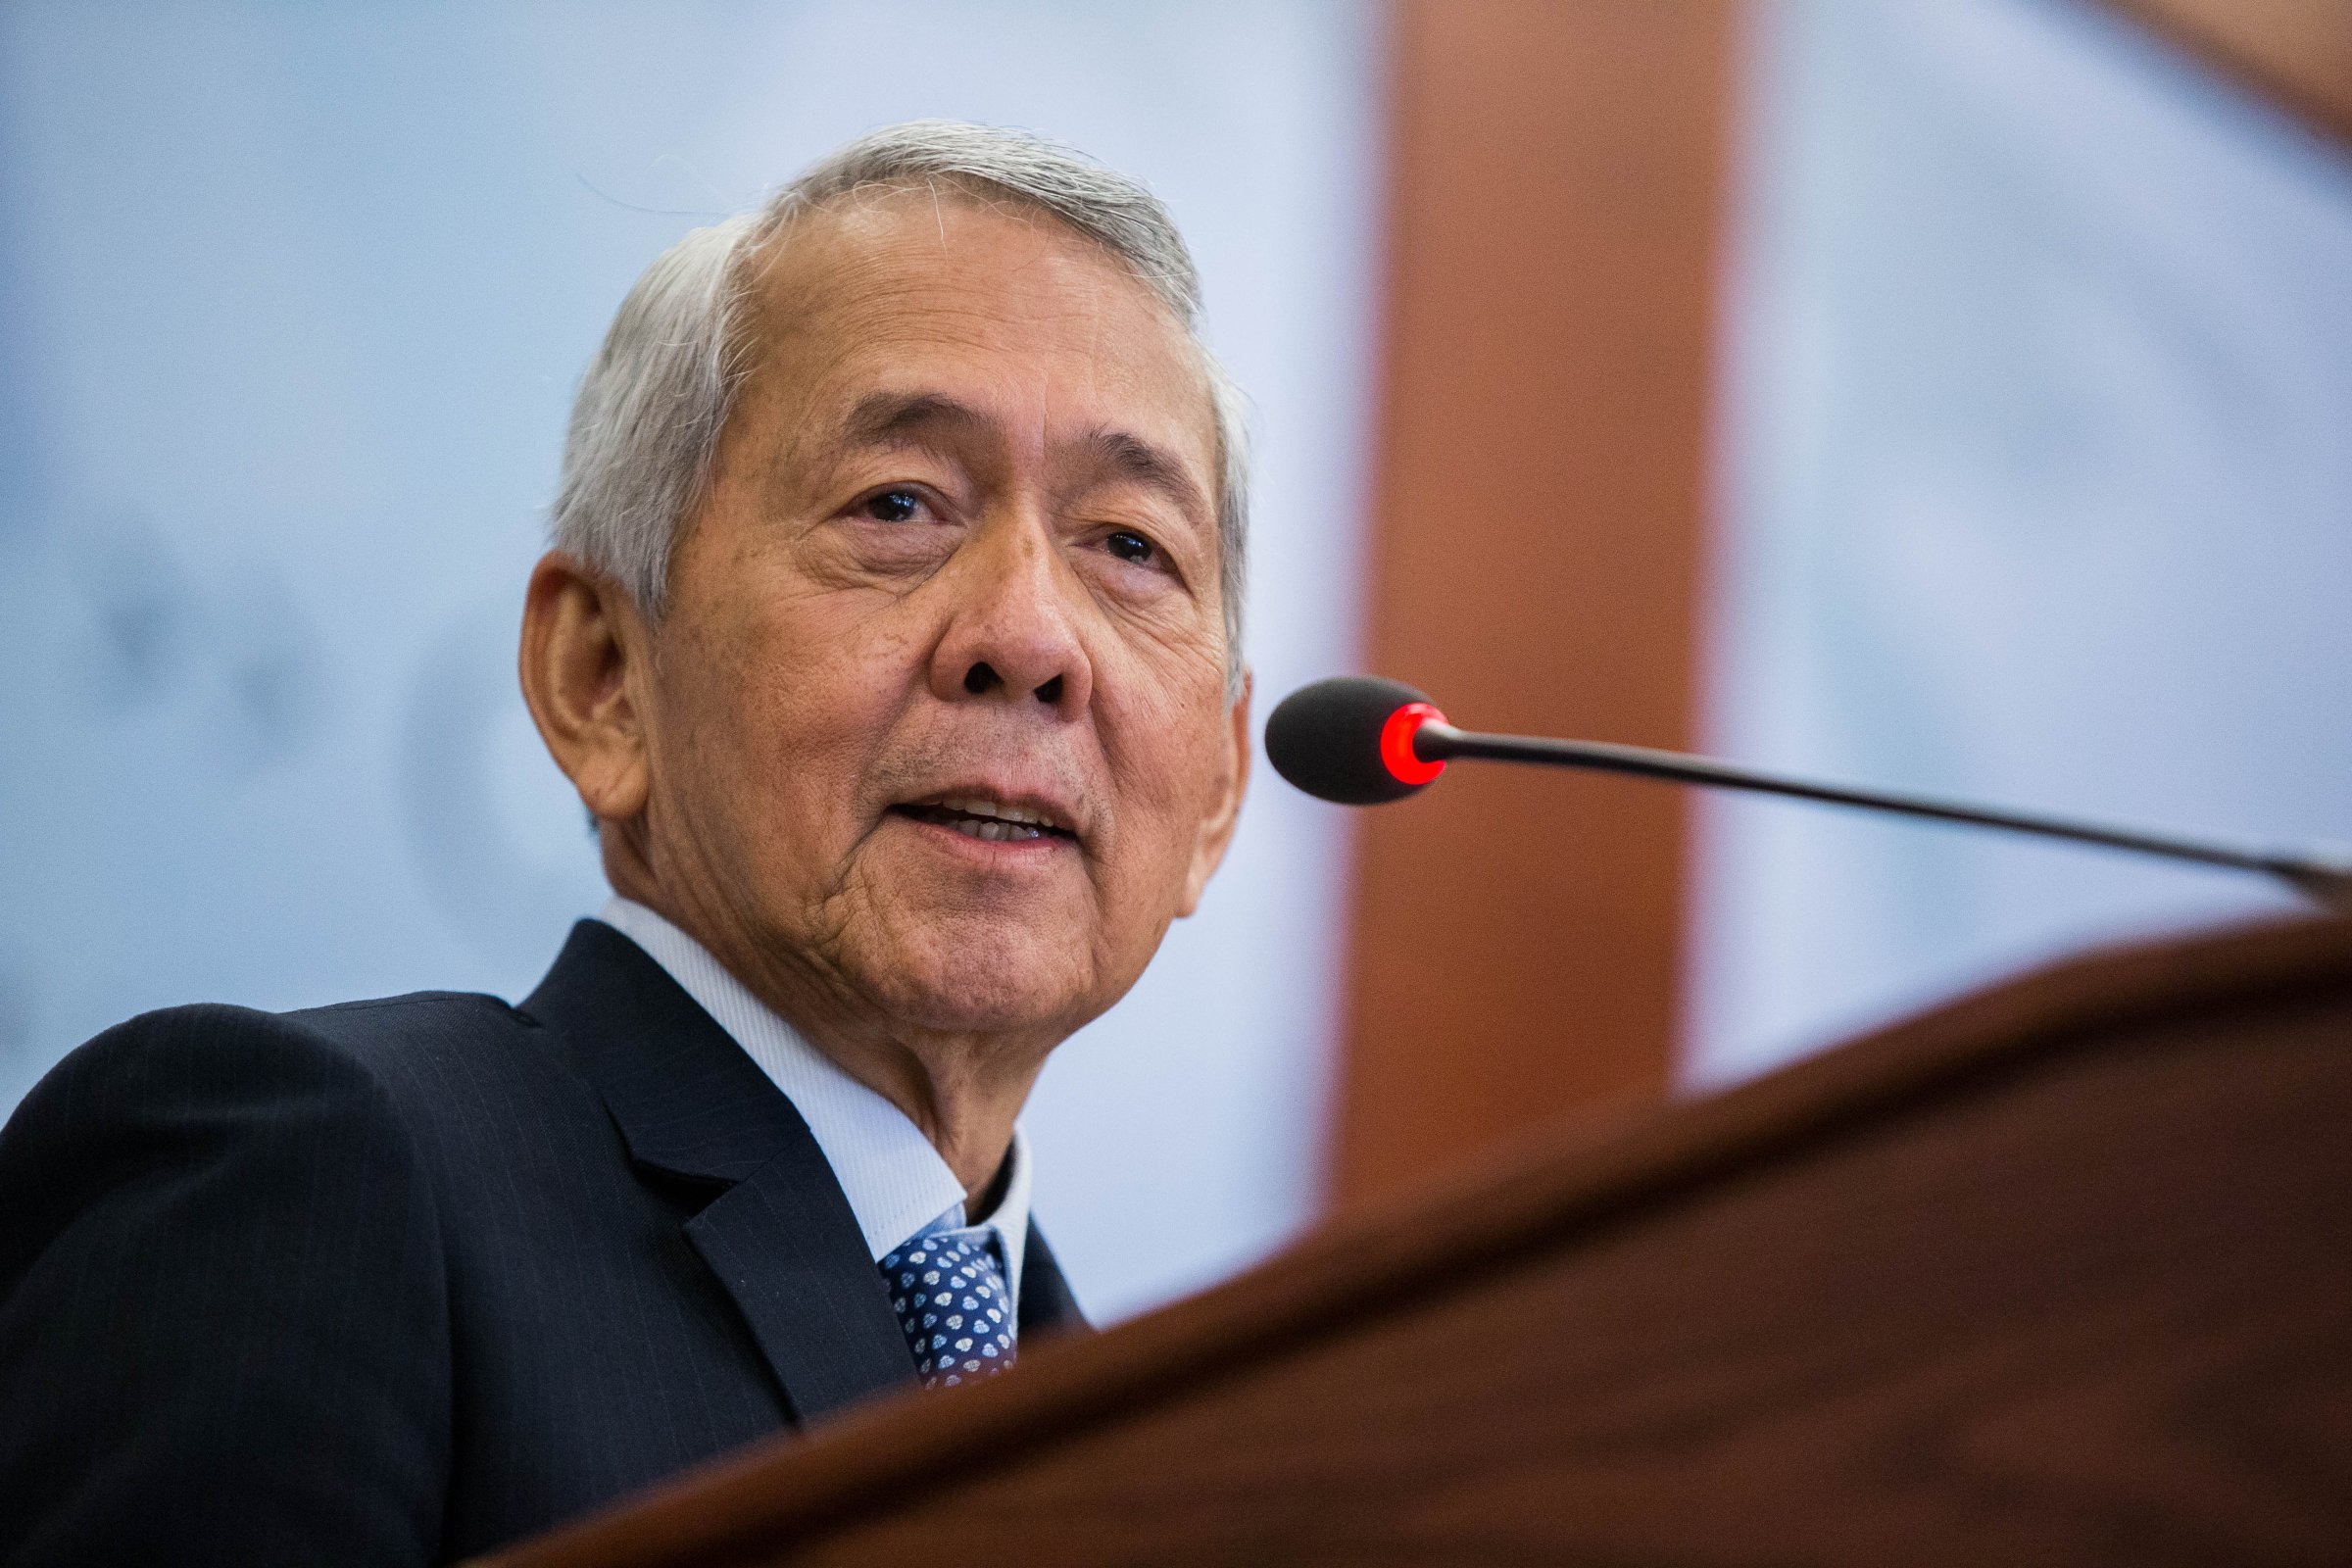 Secretary of Foreign Affairs of the Philippines Perfecto Yasay Jr. speaks during a forum at the Center for Strategic and International Studies headquarters in Washington, D.C., Sept. 15, 2016.